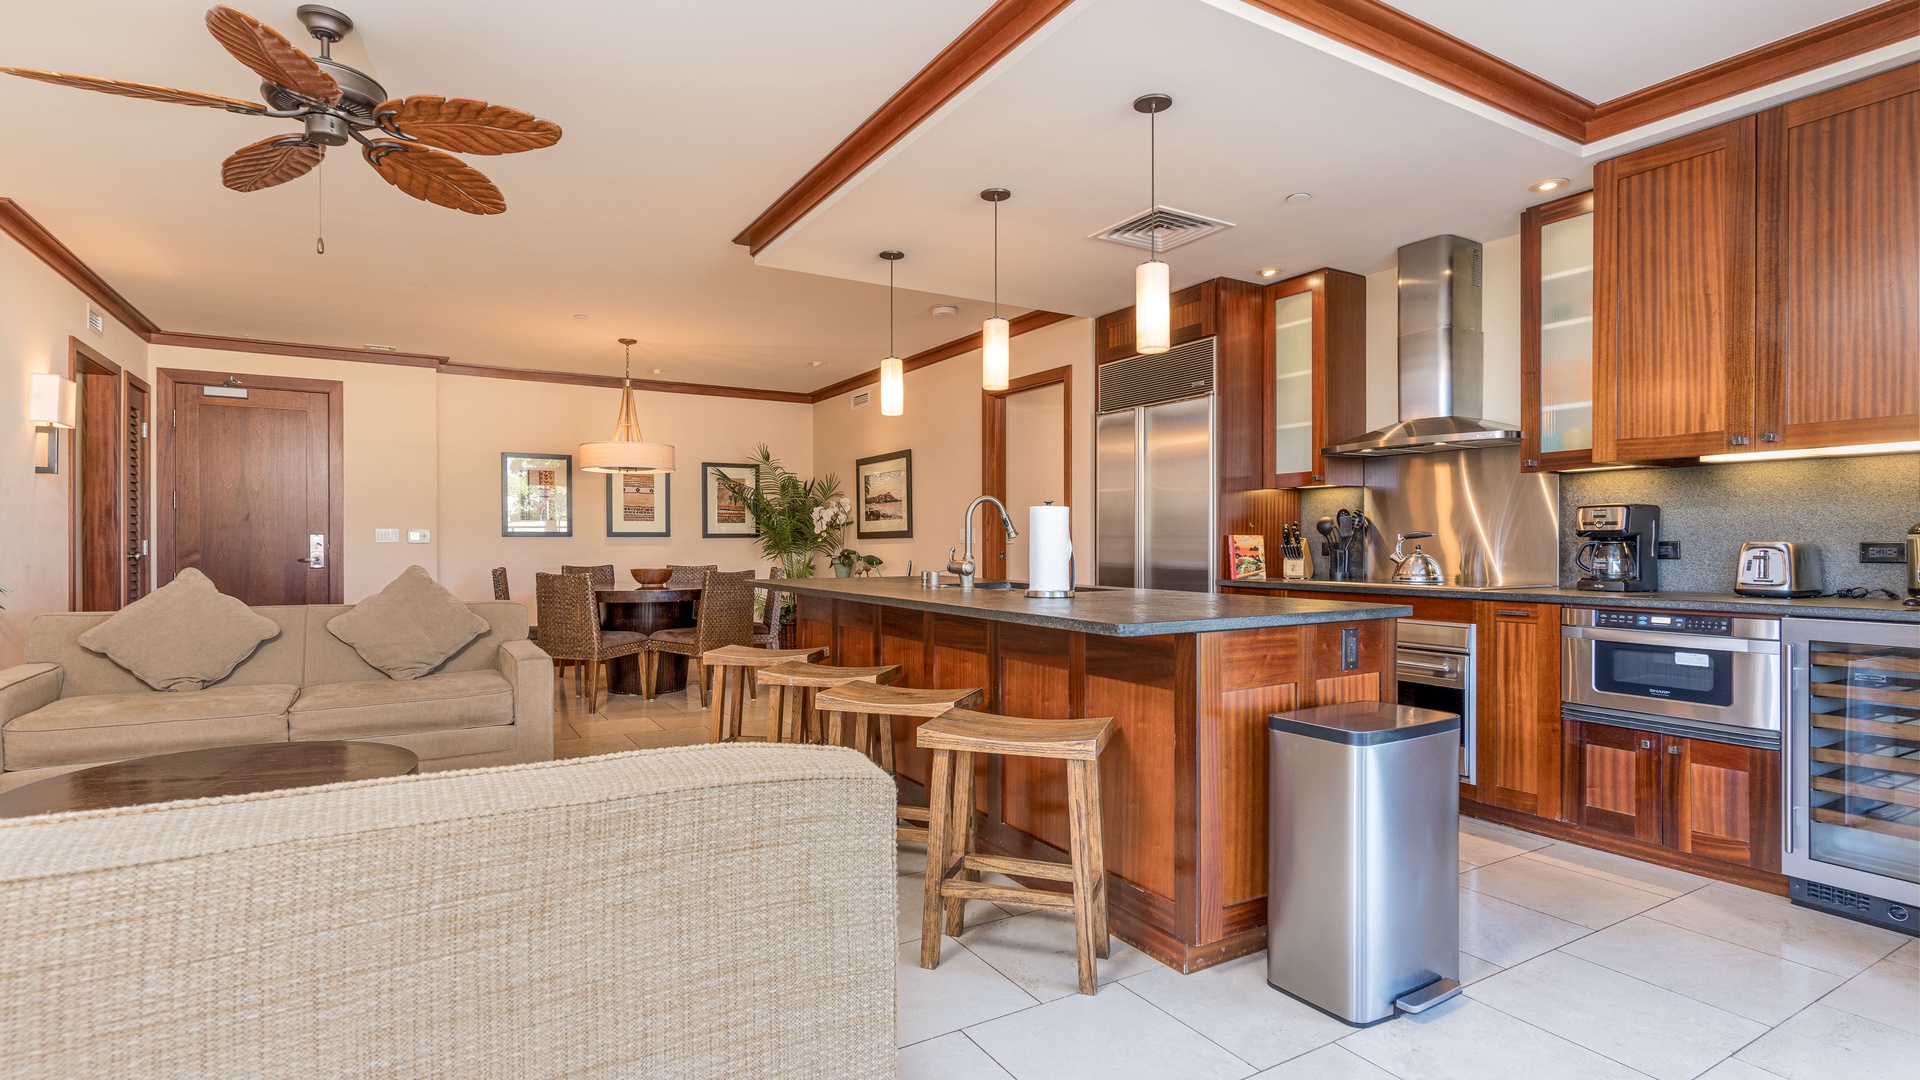 Kapolei Vacation Rentals, Ko Olina Beach Villas B202 - The living room, kitchen and dining are conveniently designed.